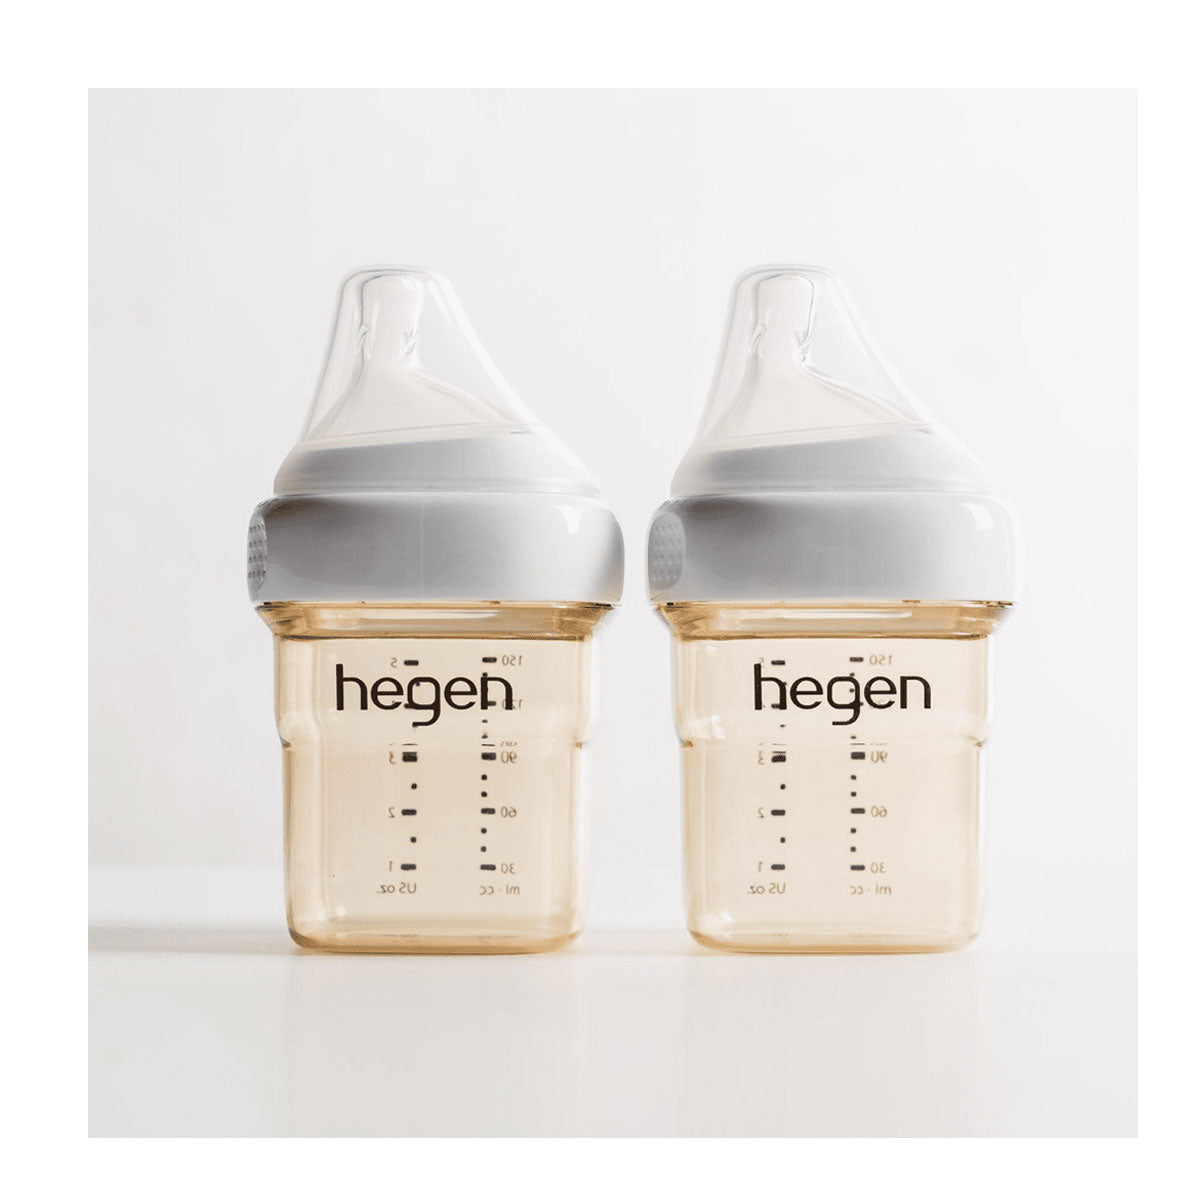 Hegen’s “softsquare” baby bottle design delivers a myriad of benefits – these innovative, ergonomically shaped bottles are easier for baby to hold. Stackable feeding bottles nestle together when empty and stack neatly when filled, optimising storage space in the freezer or a mother’s bag. 